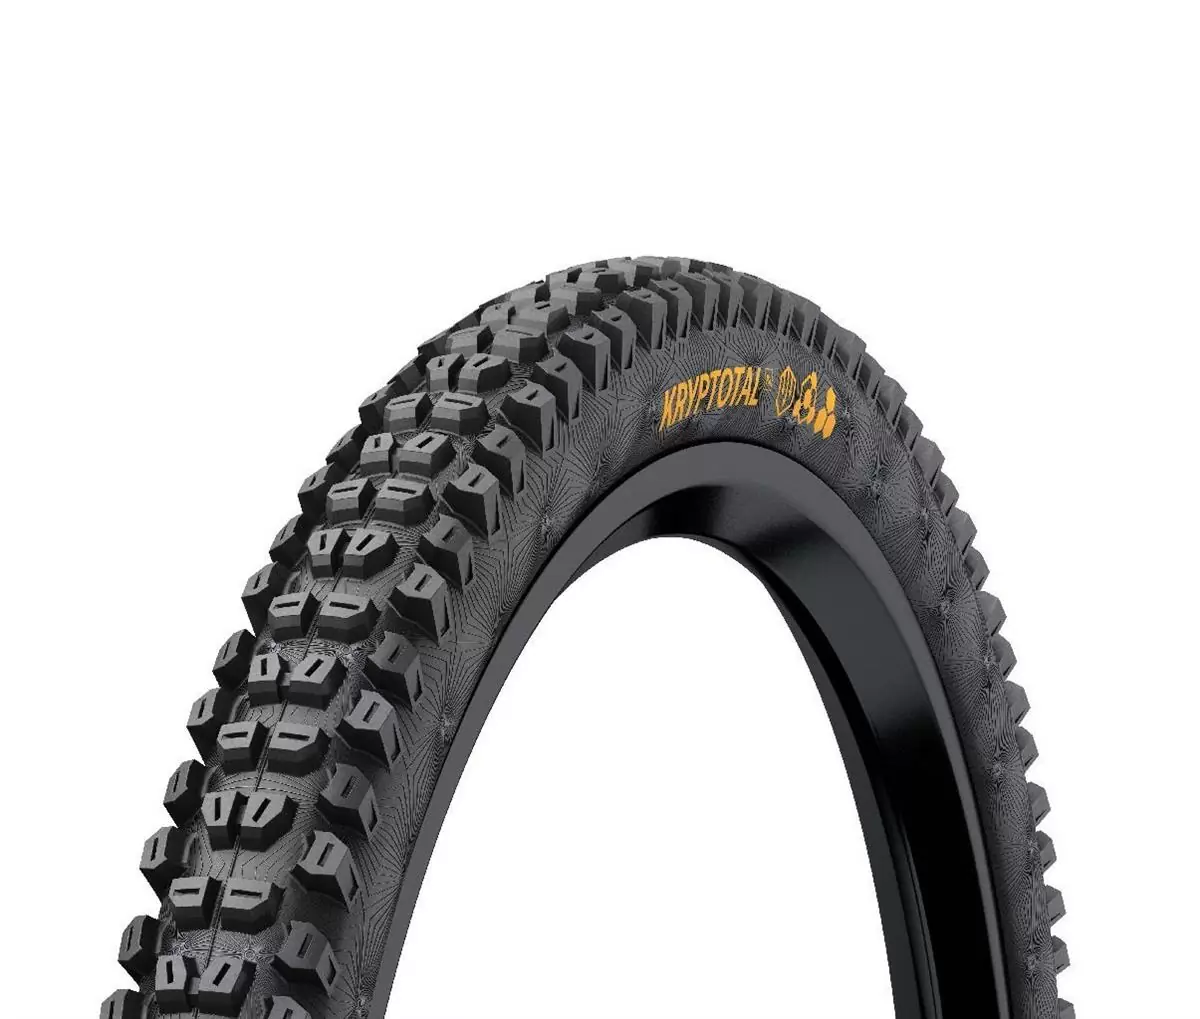 Kryptotal-R 27.5x2.40 Endurance-Compound/Trail Casing Folding Tubeless ready Tire - image